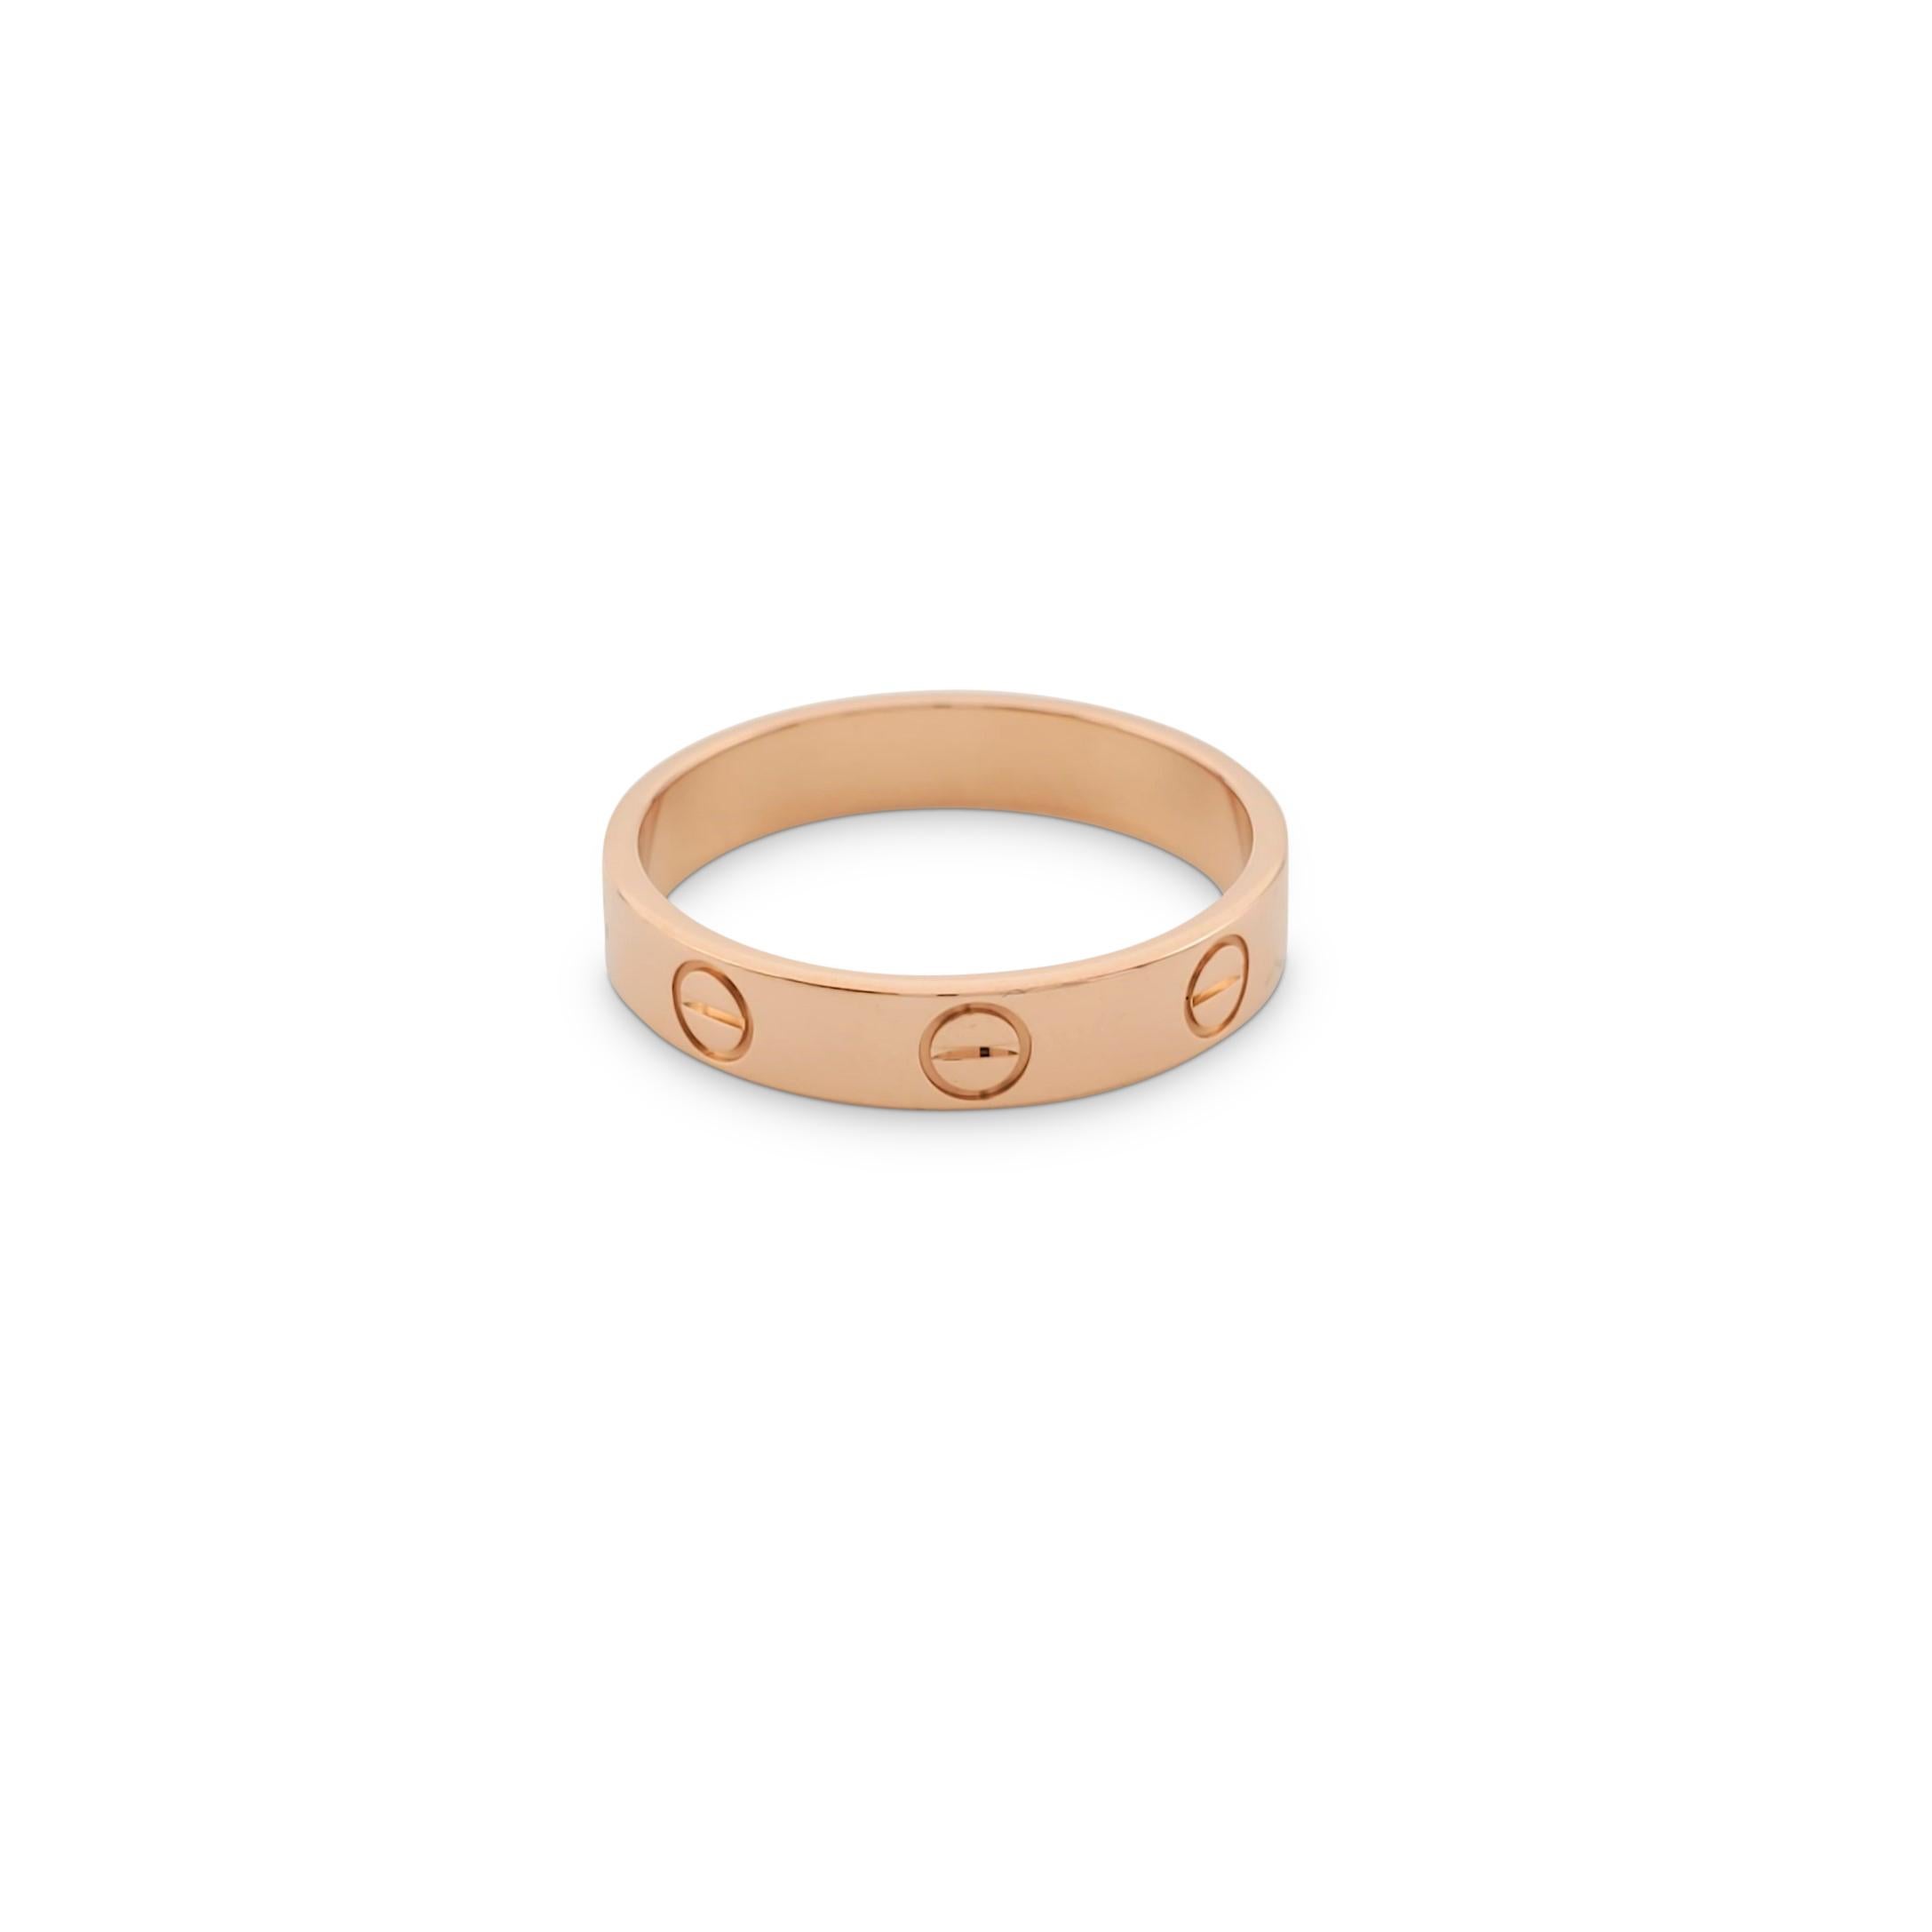 Authentic Cartier 'Love' wedding band crafted in 18 karat rose gold. Signed Cartier, 750, with serial number. Ring size 53 (US 6 1/4). The ring is not presented with the original box or papers.

Ring Size: 53 (US 6 1/4)
Box: No
Papers: No